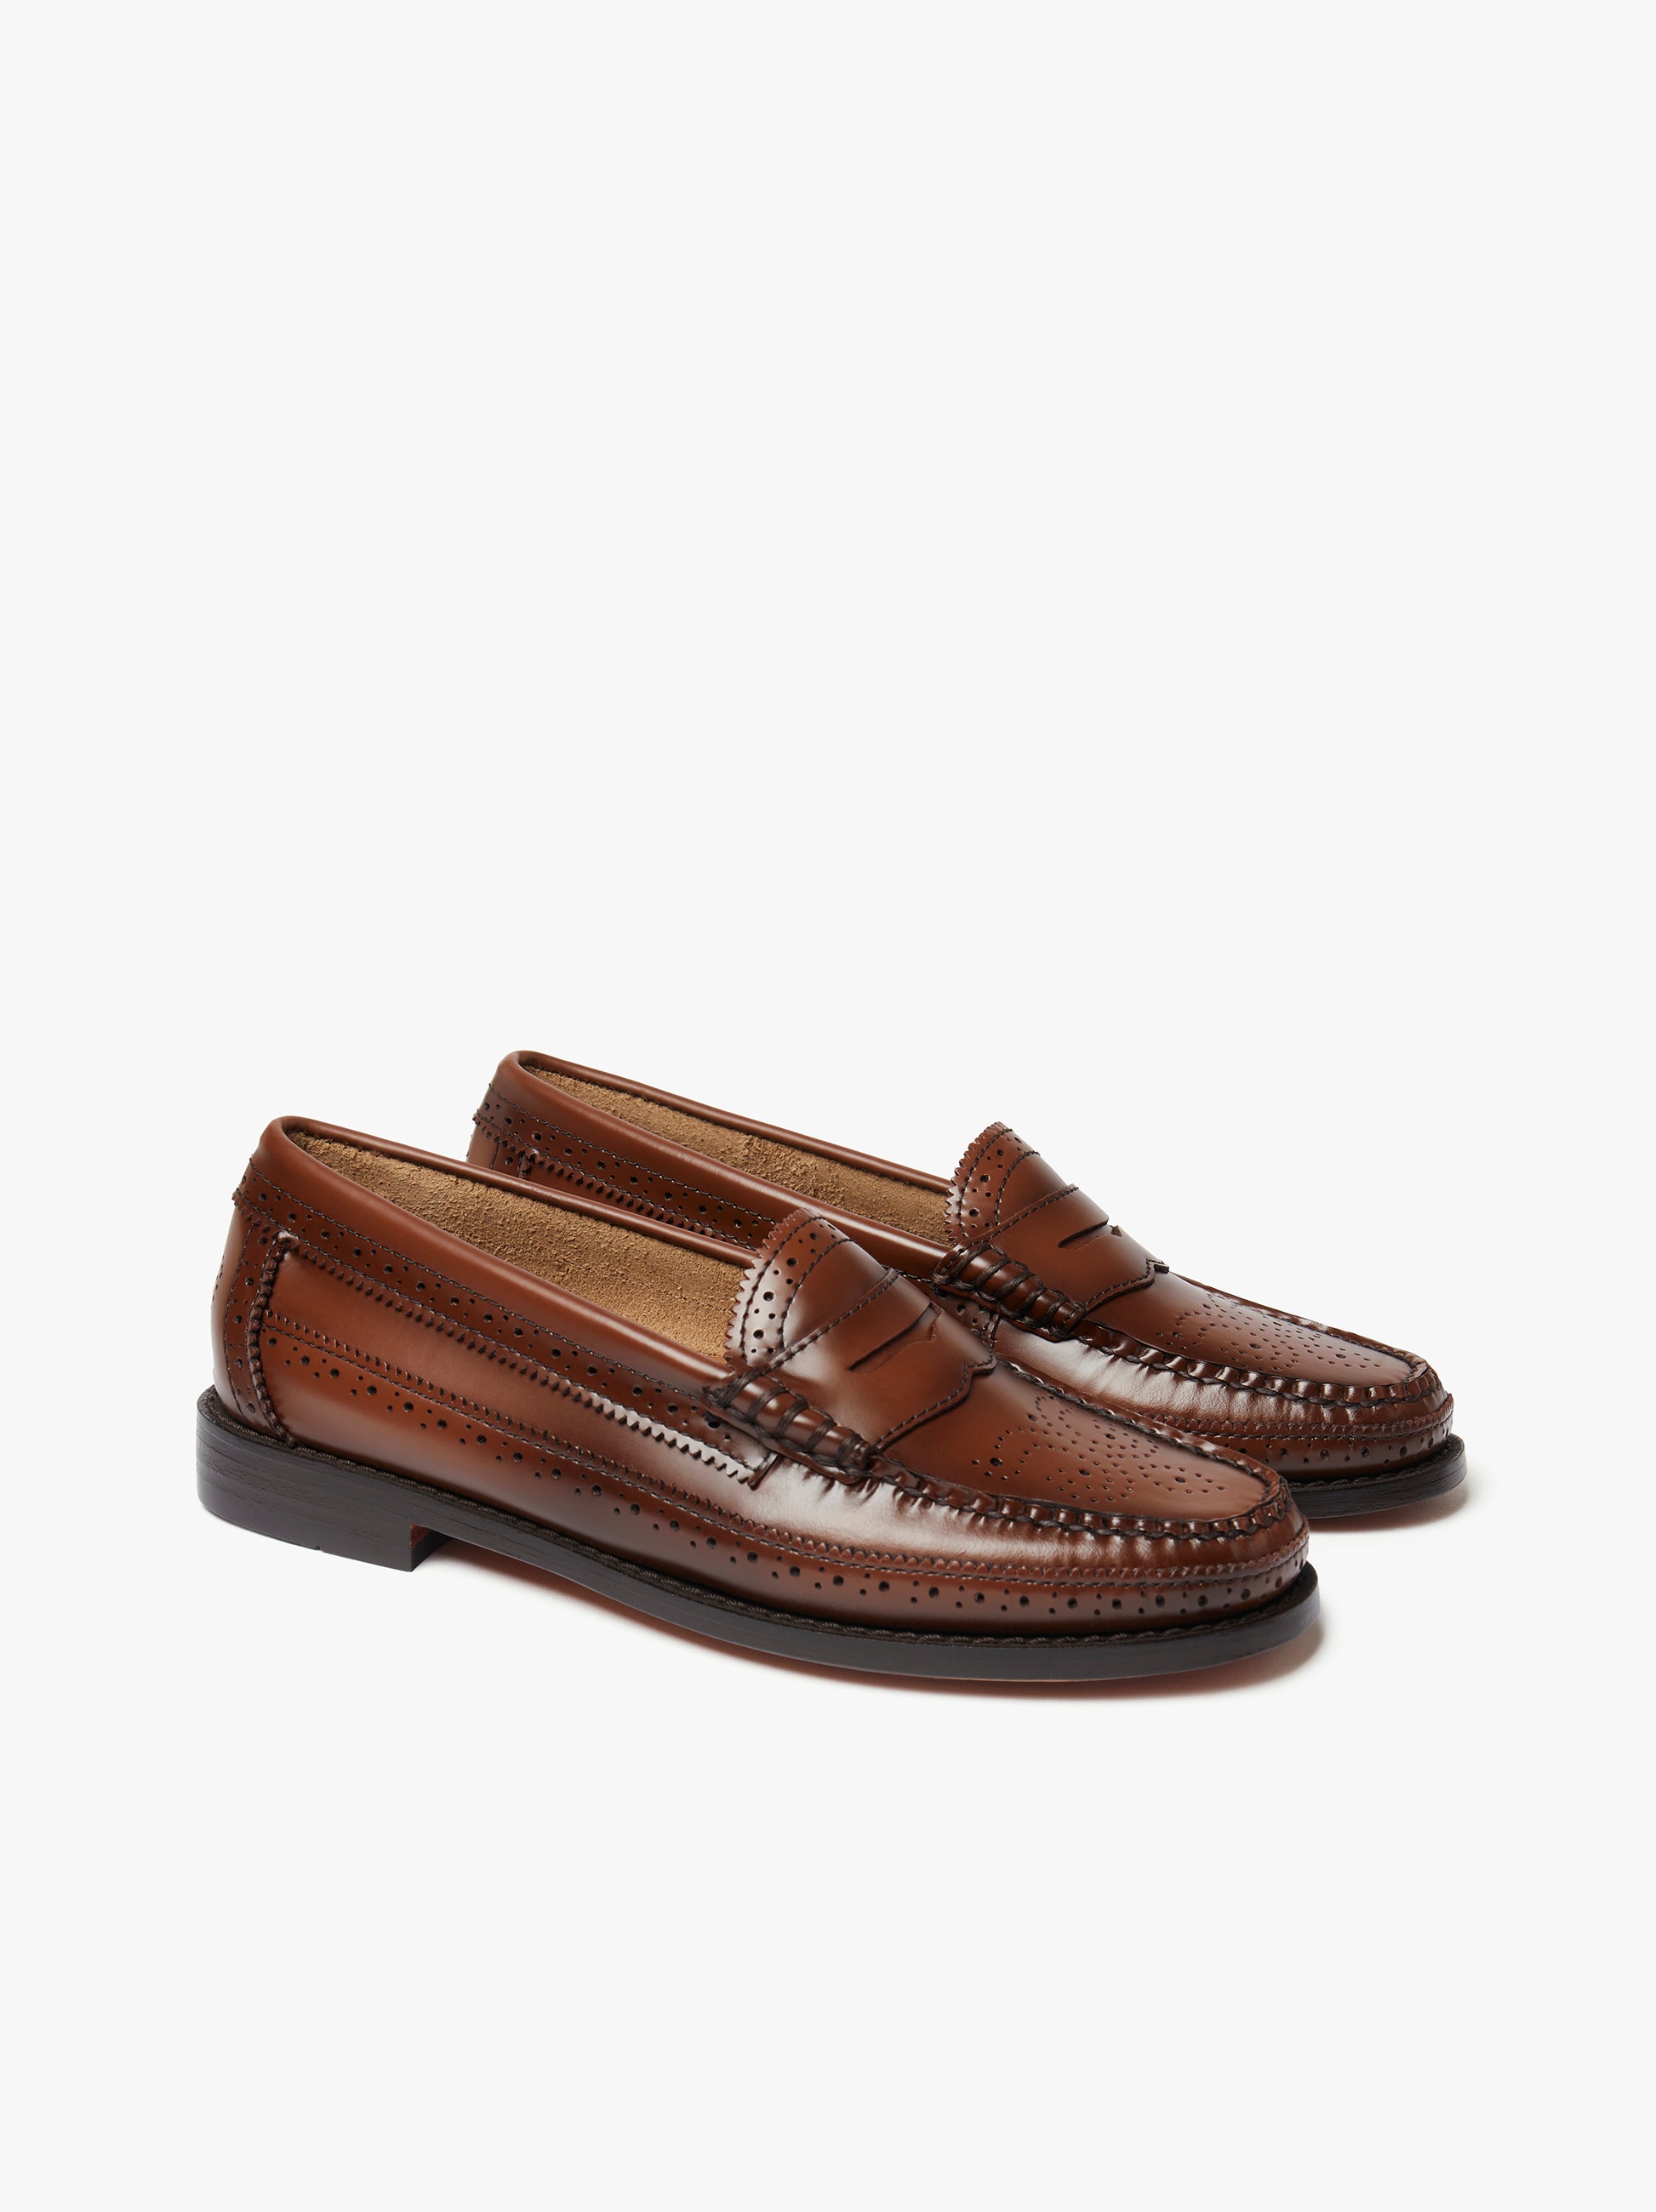 Weejuns Brogue Penny Loafers – G.H.BASS 1876